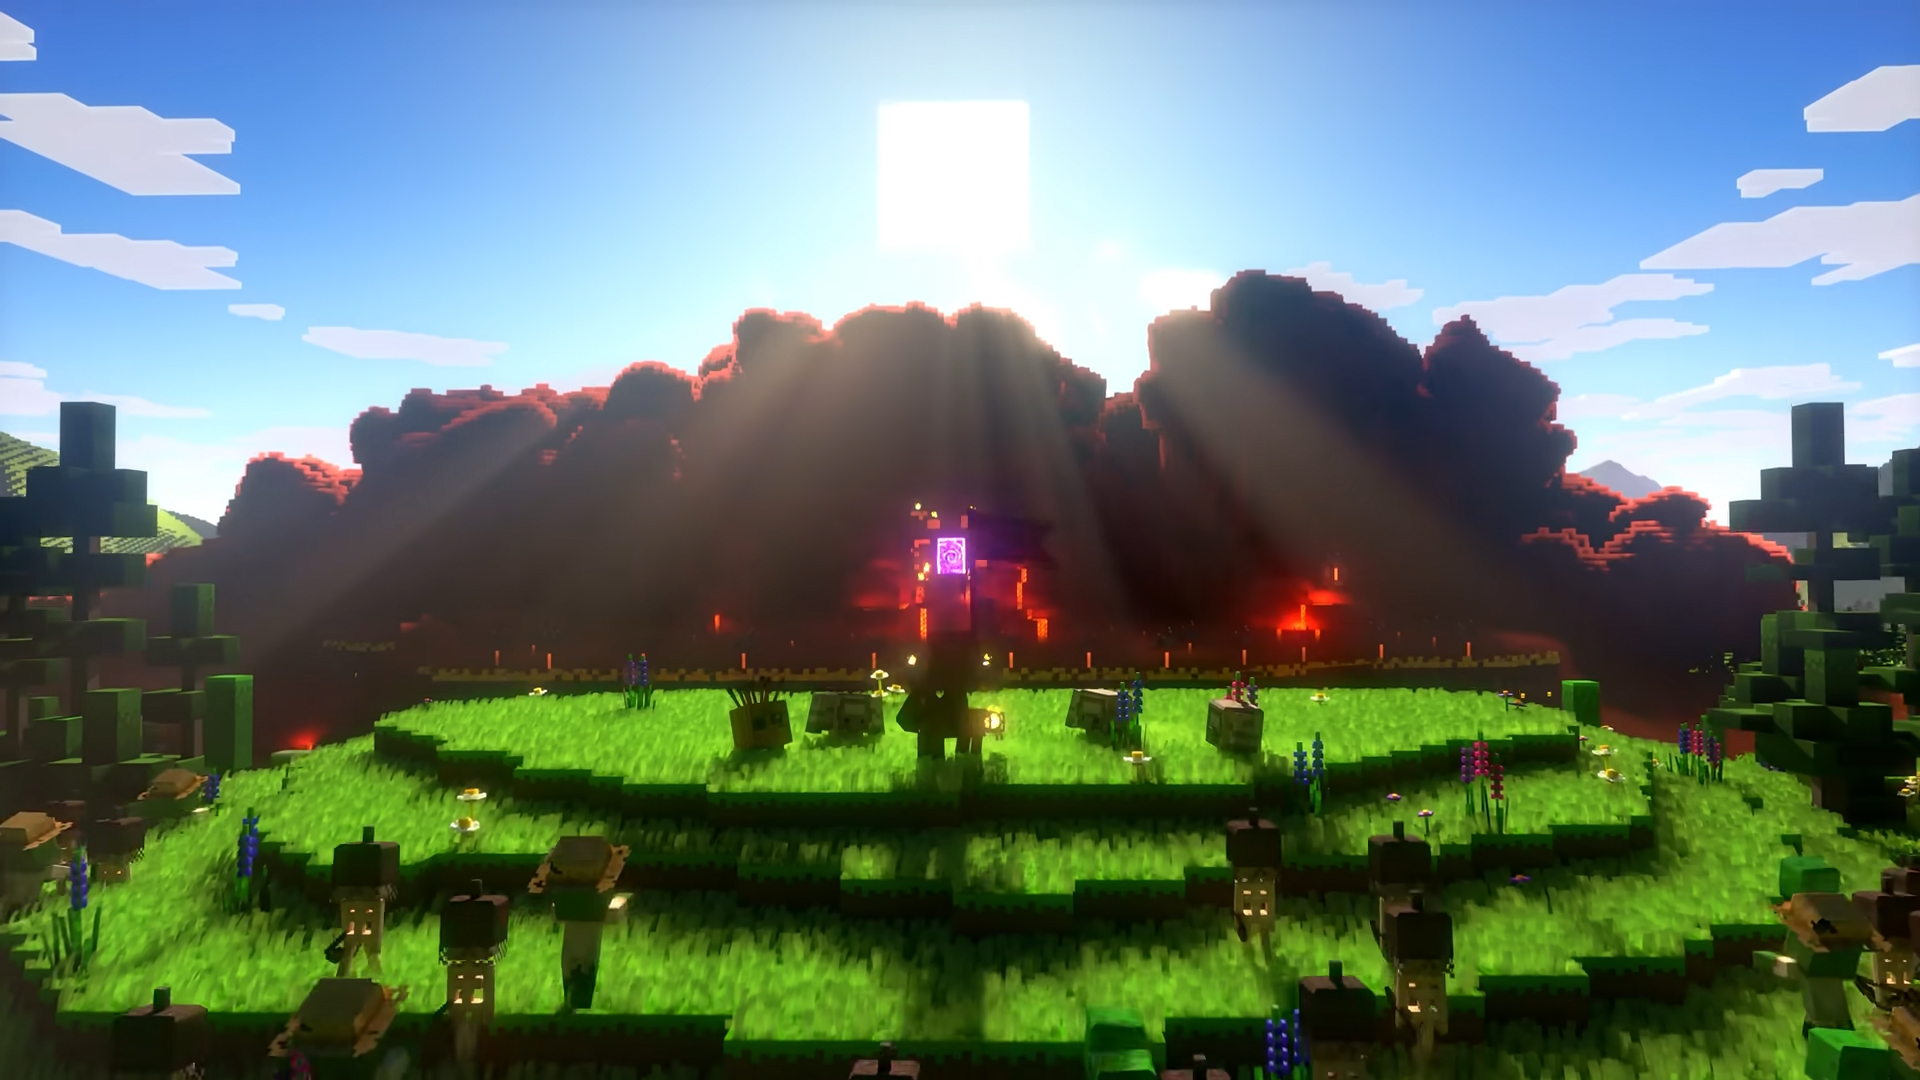 Minecraft Legends' release date, trailers and latest news